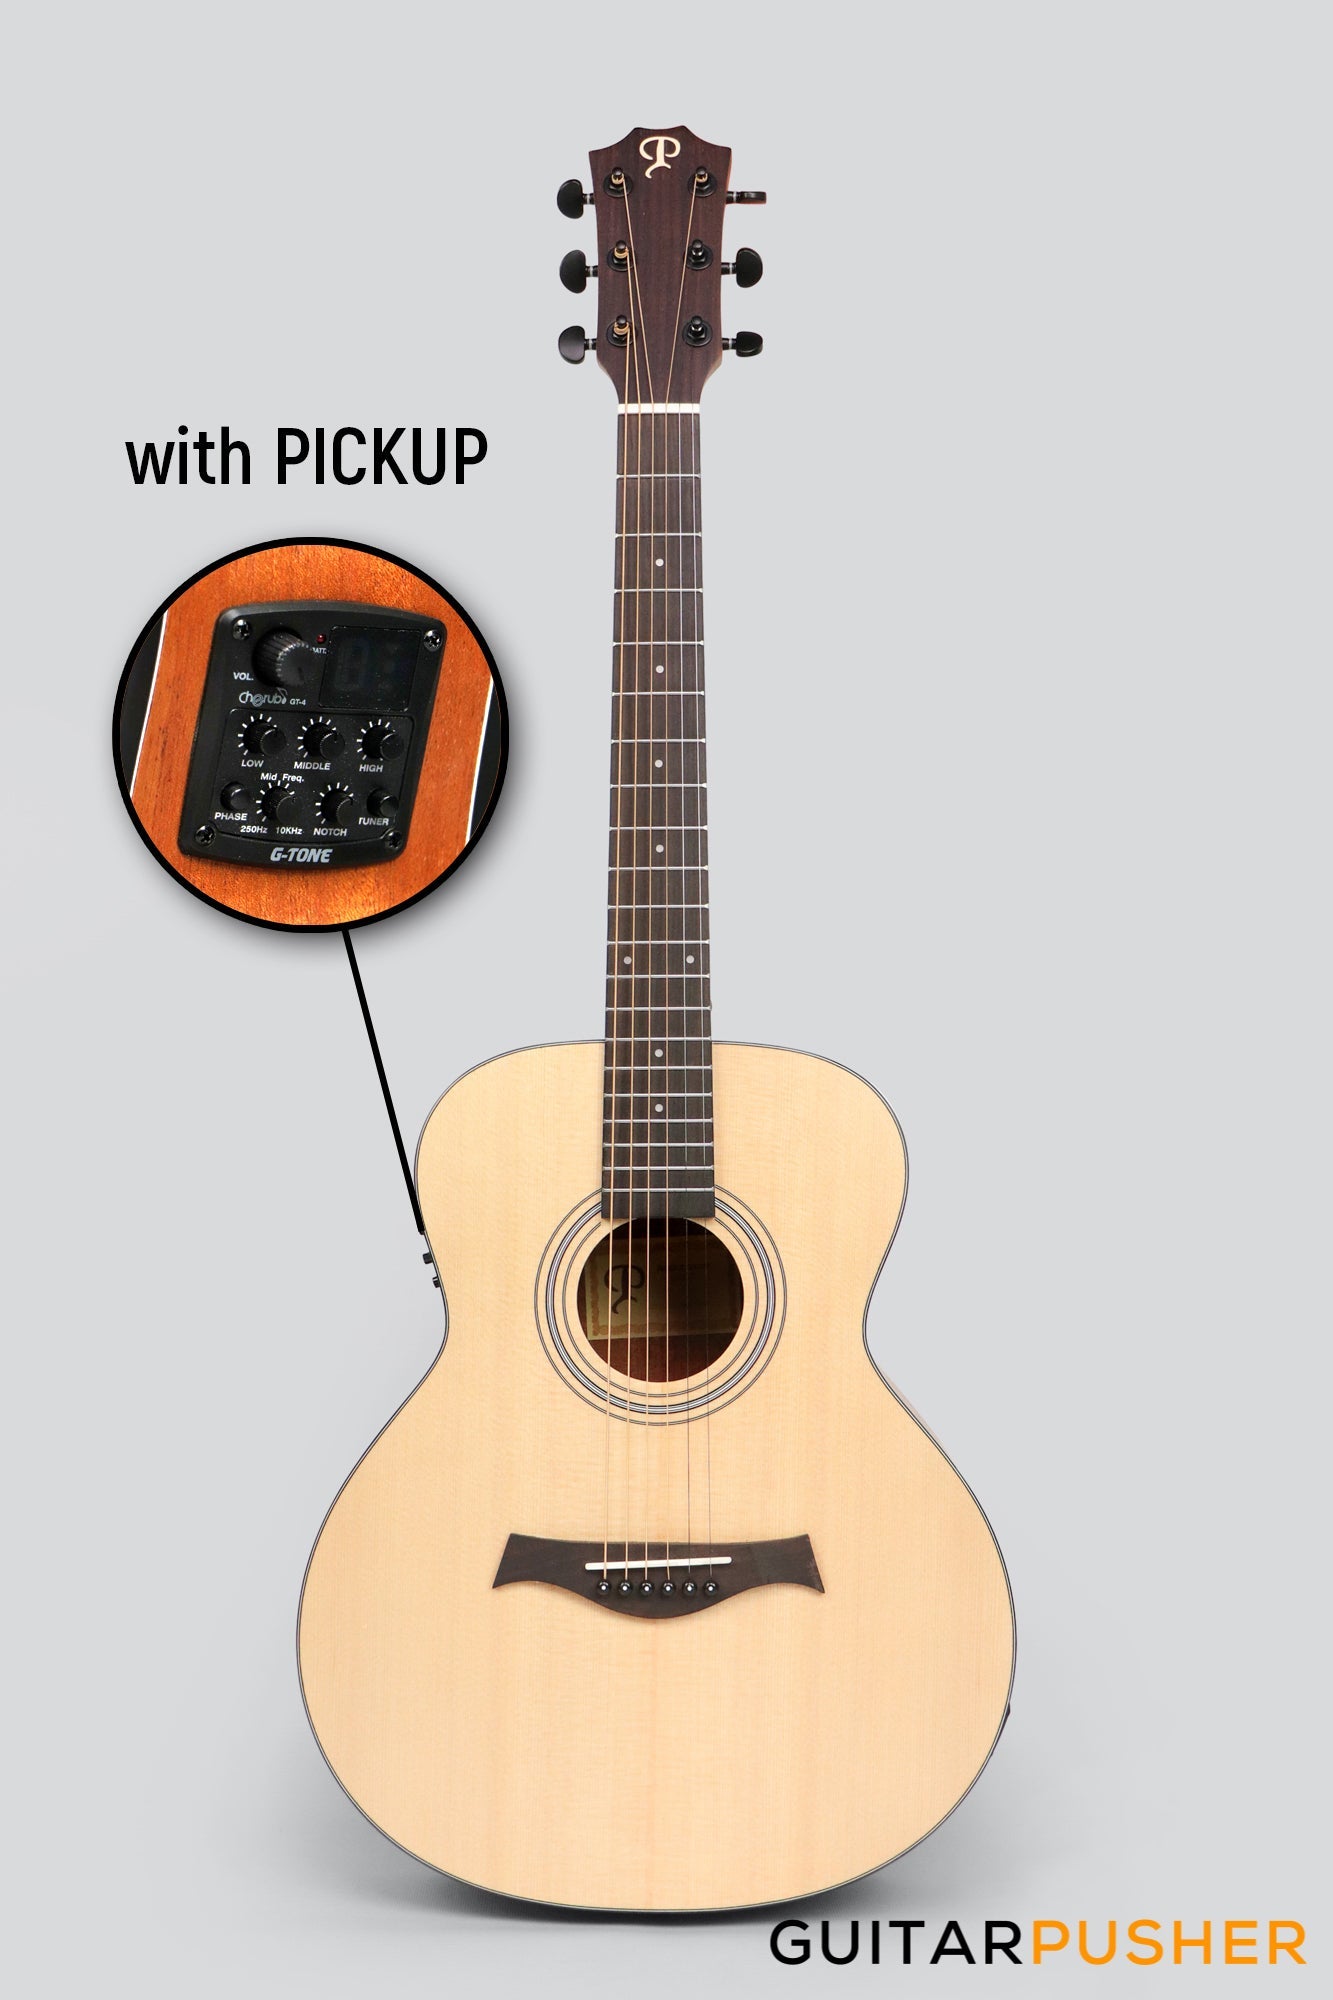 Phoebus Progeny Baby-15GSe GS Mini Acoustic-Electric Guitar w/ Gig Bag